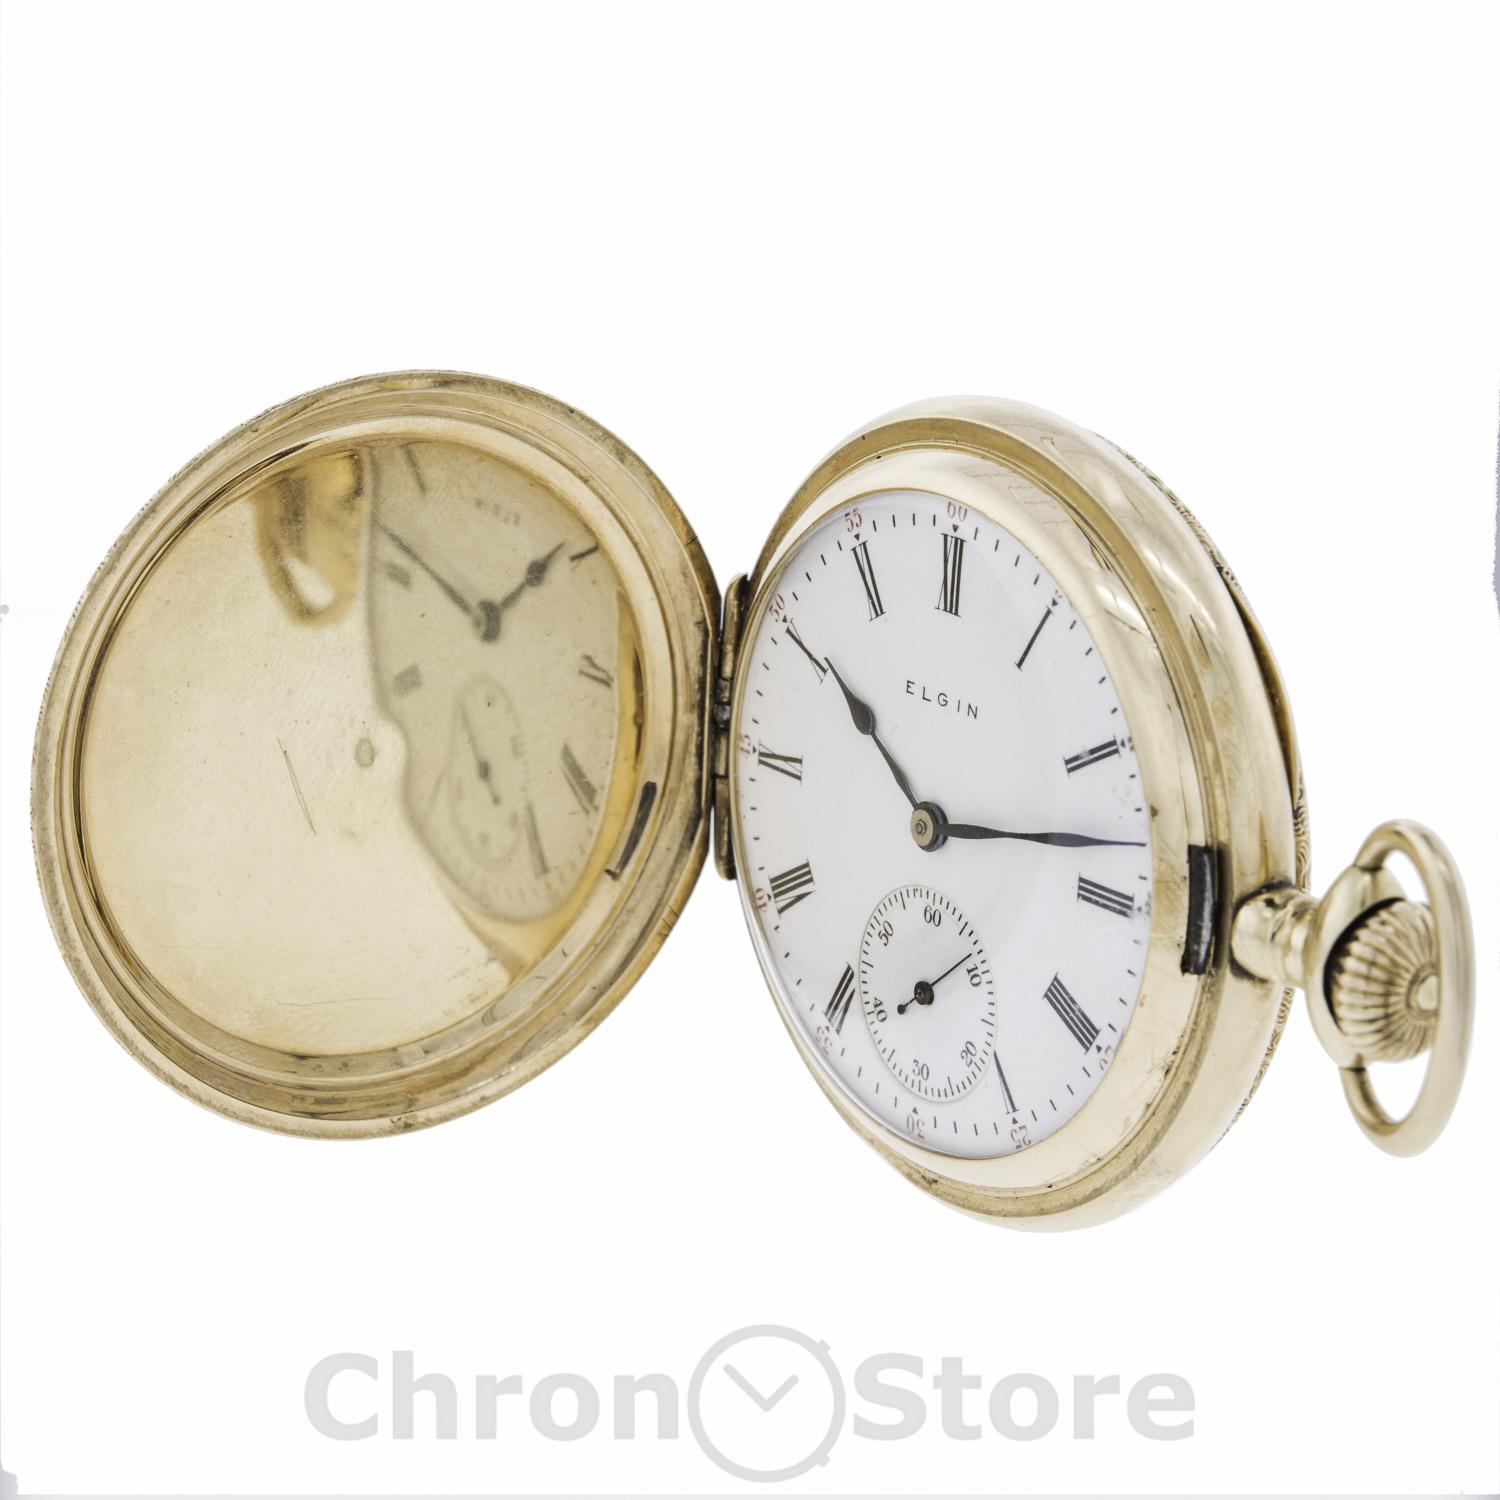 This pre-owned Elgin 14K pocket watch is a beautiful men's timepiece that is powered by a mechanical movement which is cased in a yellow gold case. It has a round shape face, small seconds subdial dial and has hand roman numerals style markers. This